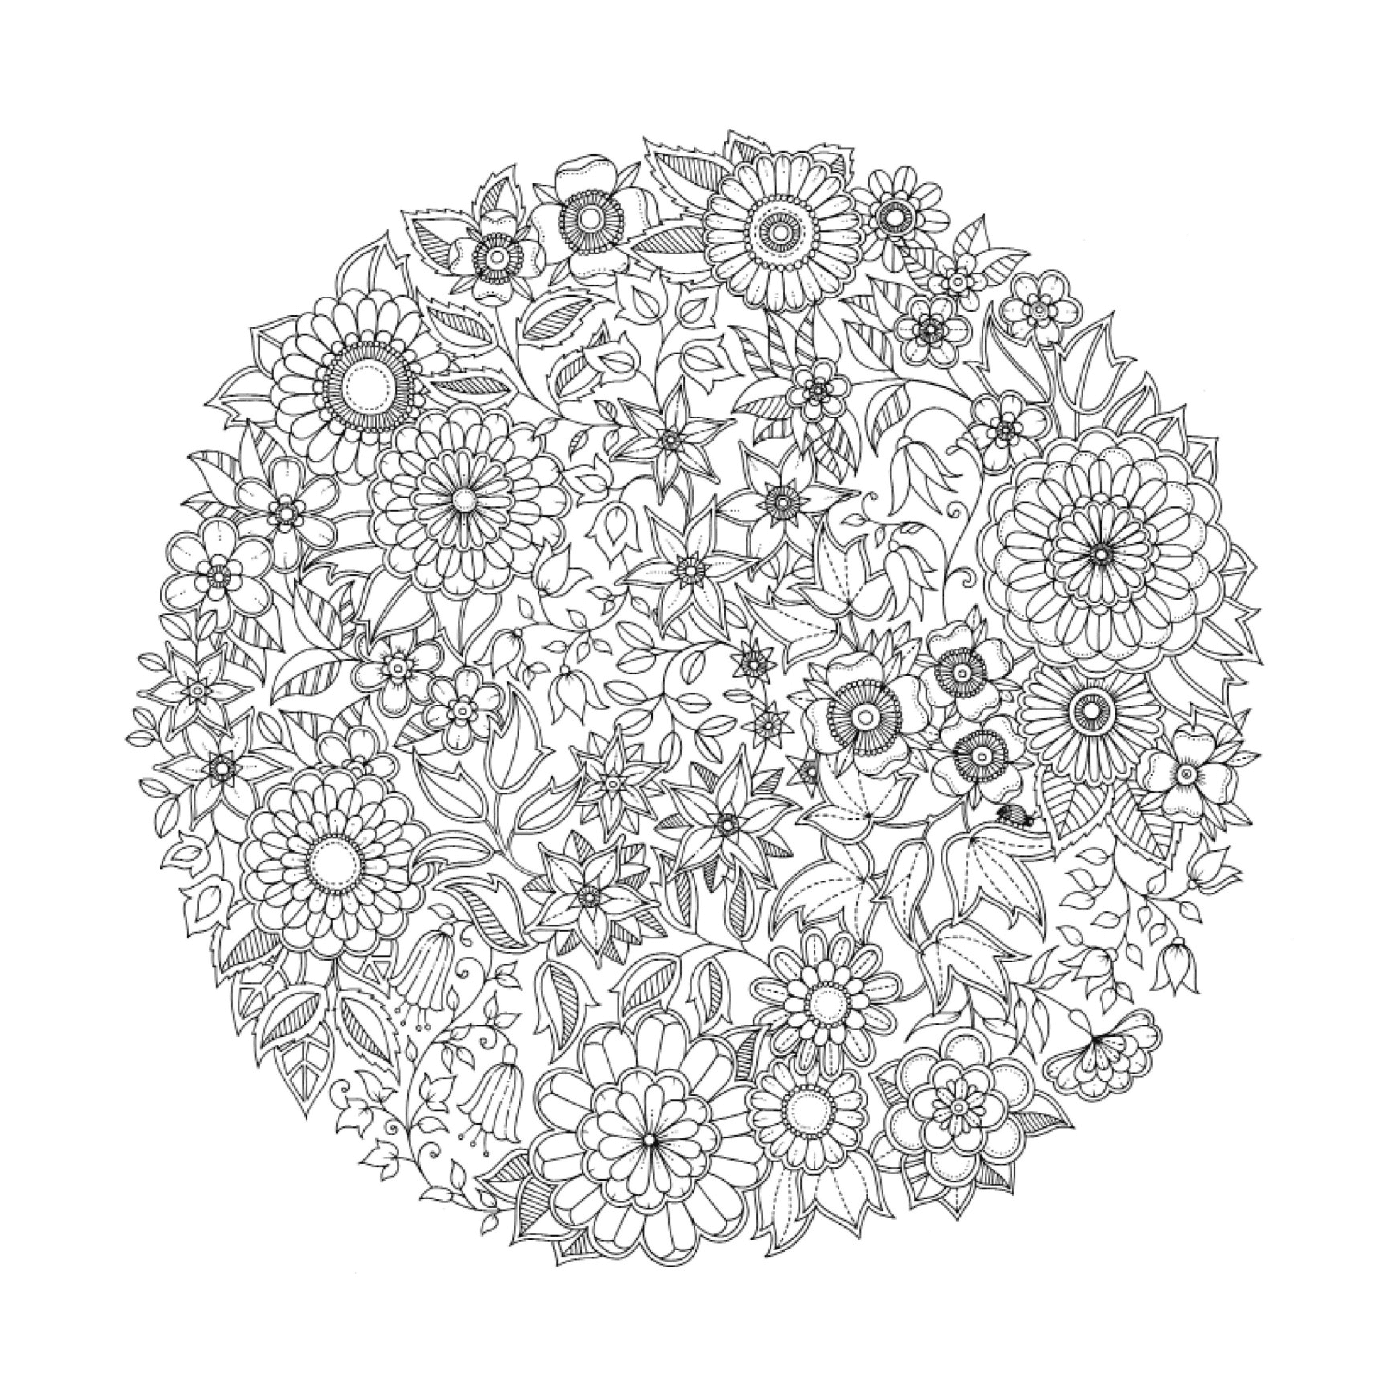  Circular model of flowers in black and white 